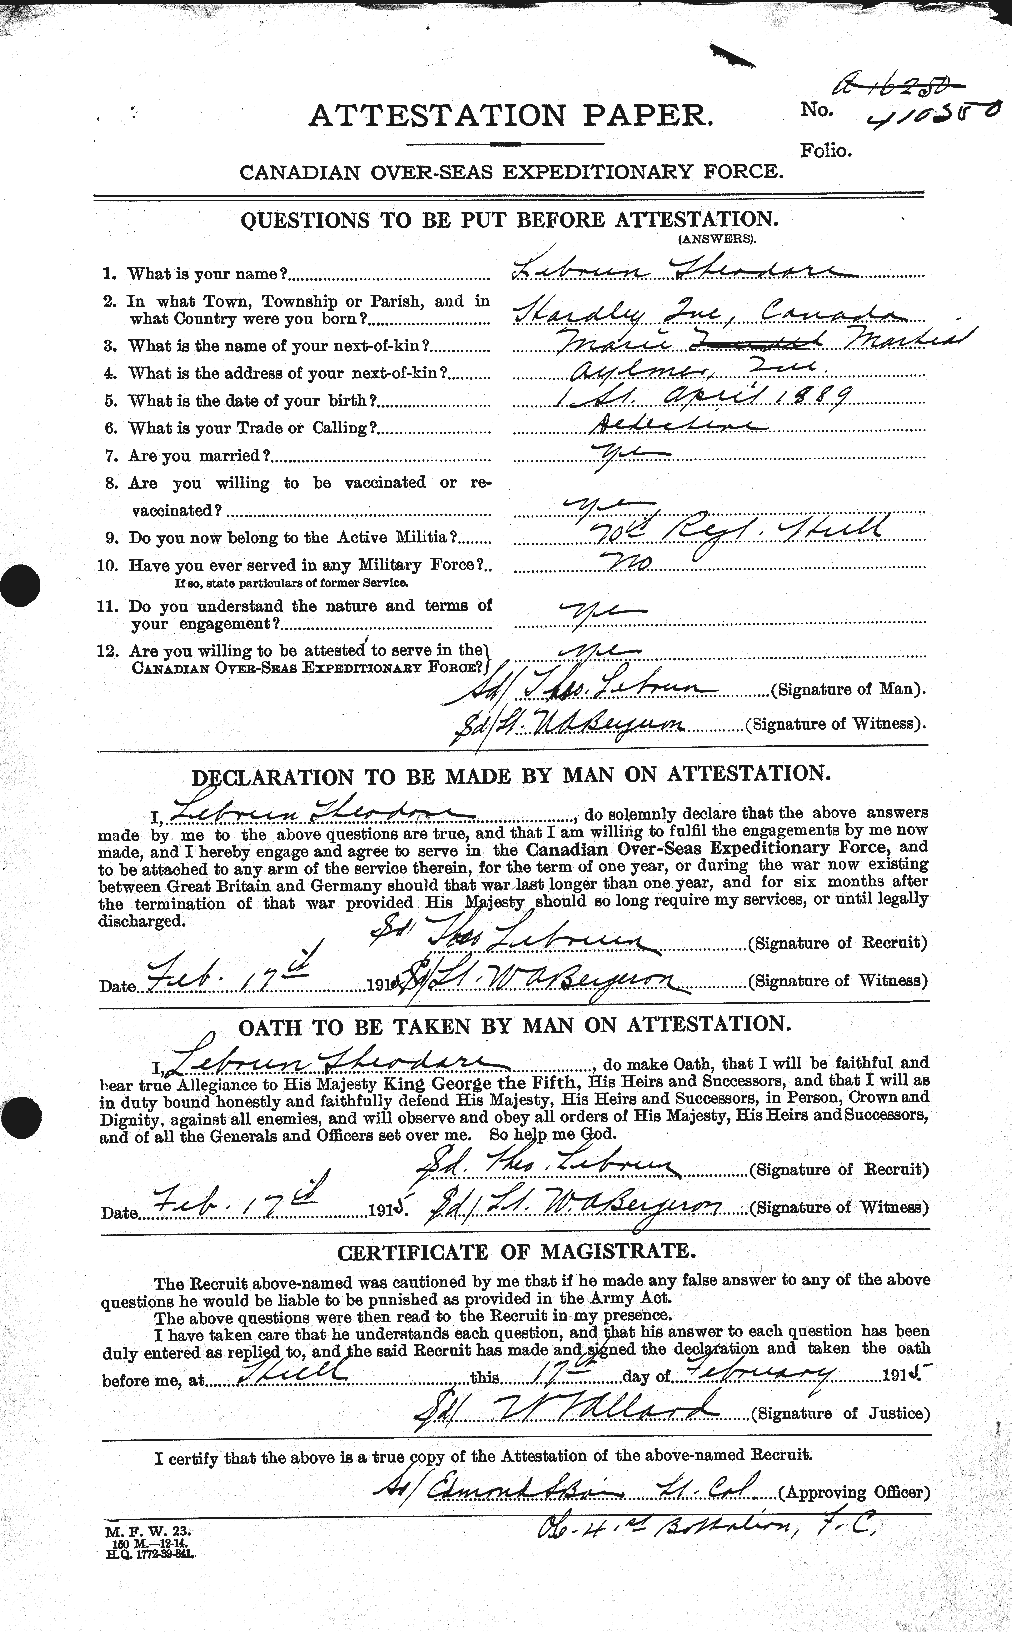 Personnel Records of the First World War - CEF 461590a